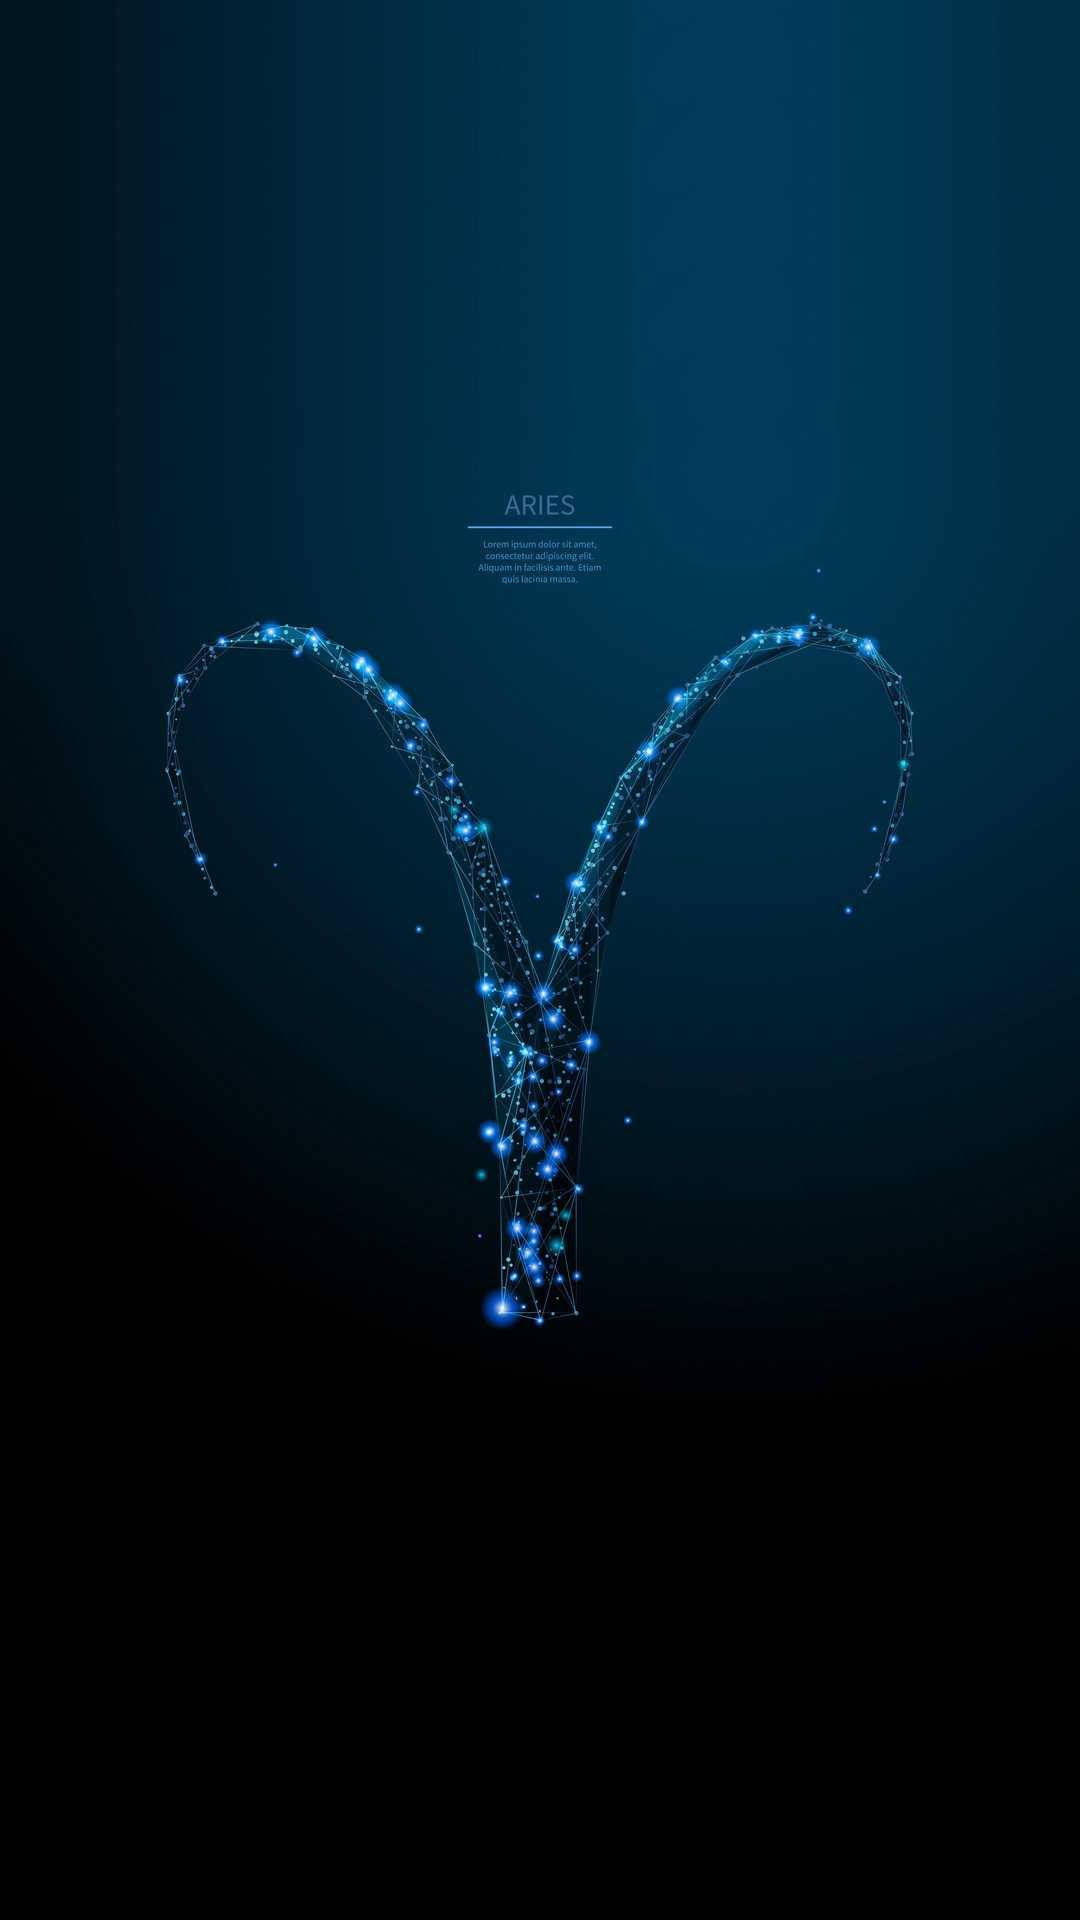 Download Blue Sparkly Aries Aesthetic Zodiac Sign Wallpaper